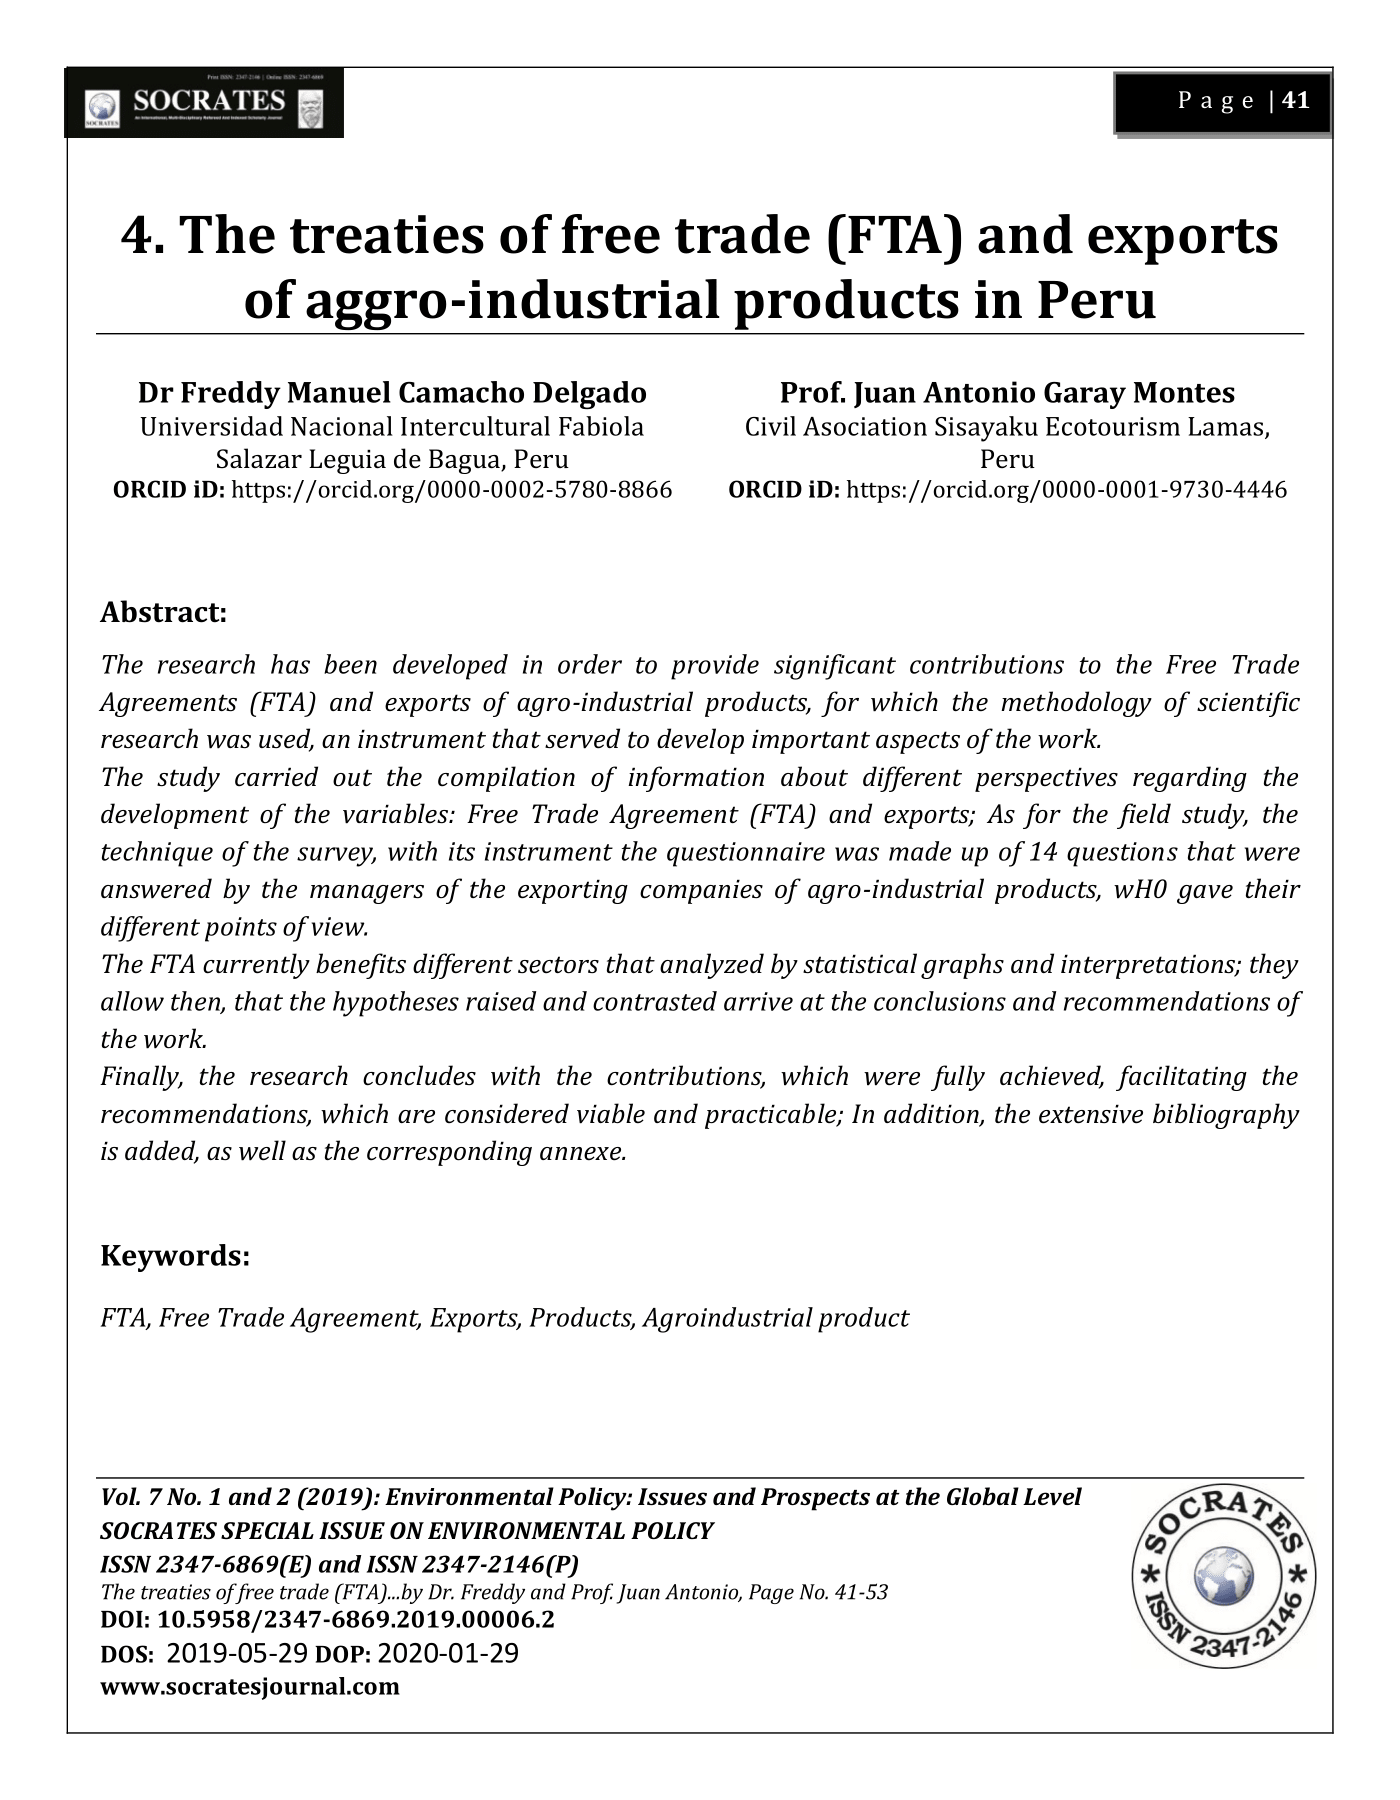 The treaties of free trade (FTA) and exports of aggro-industrial products in Peru